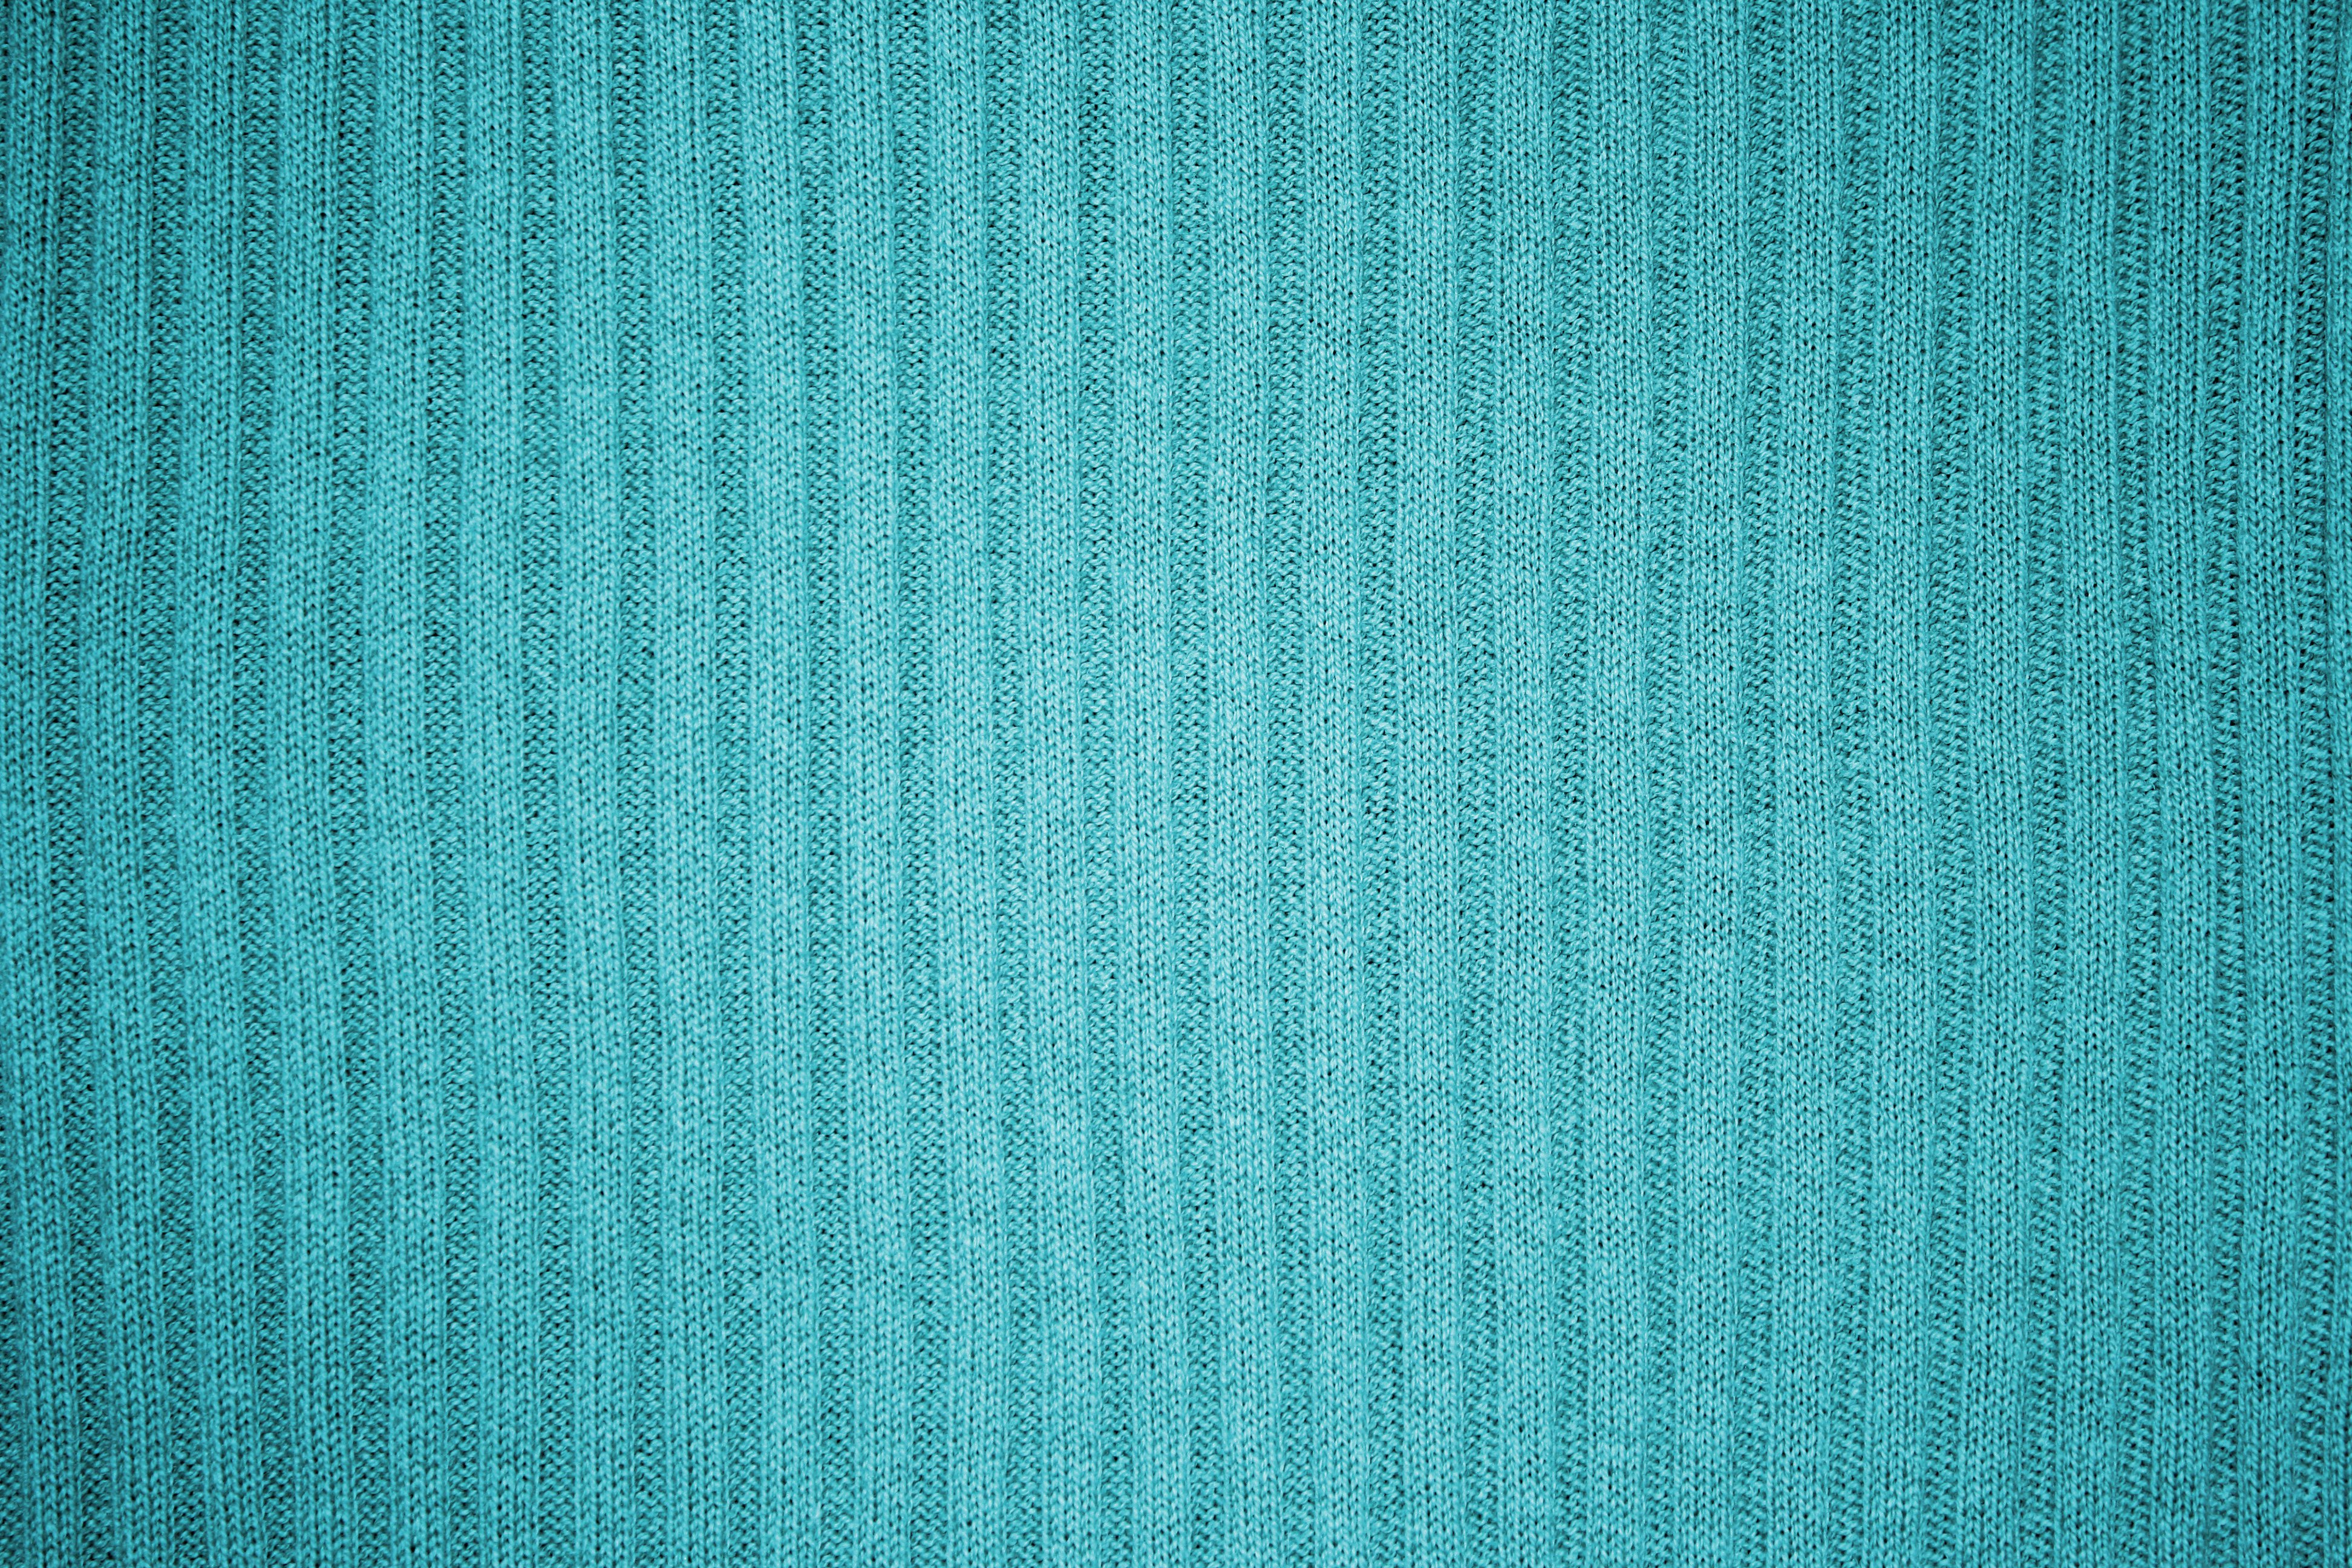 Teal or Turquoise Ribbed Knit Fabric Texture Picture | Free ...